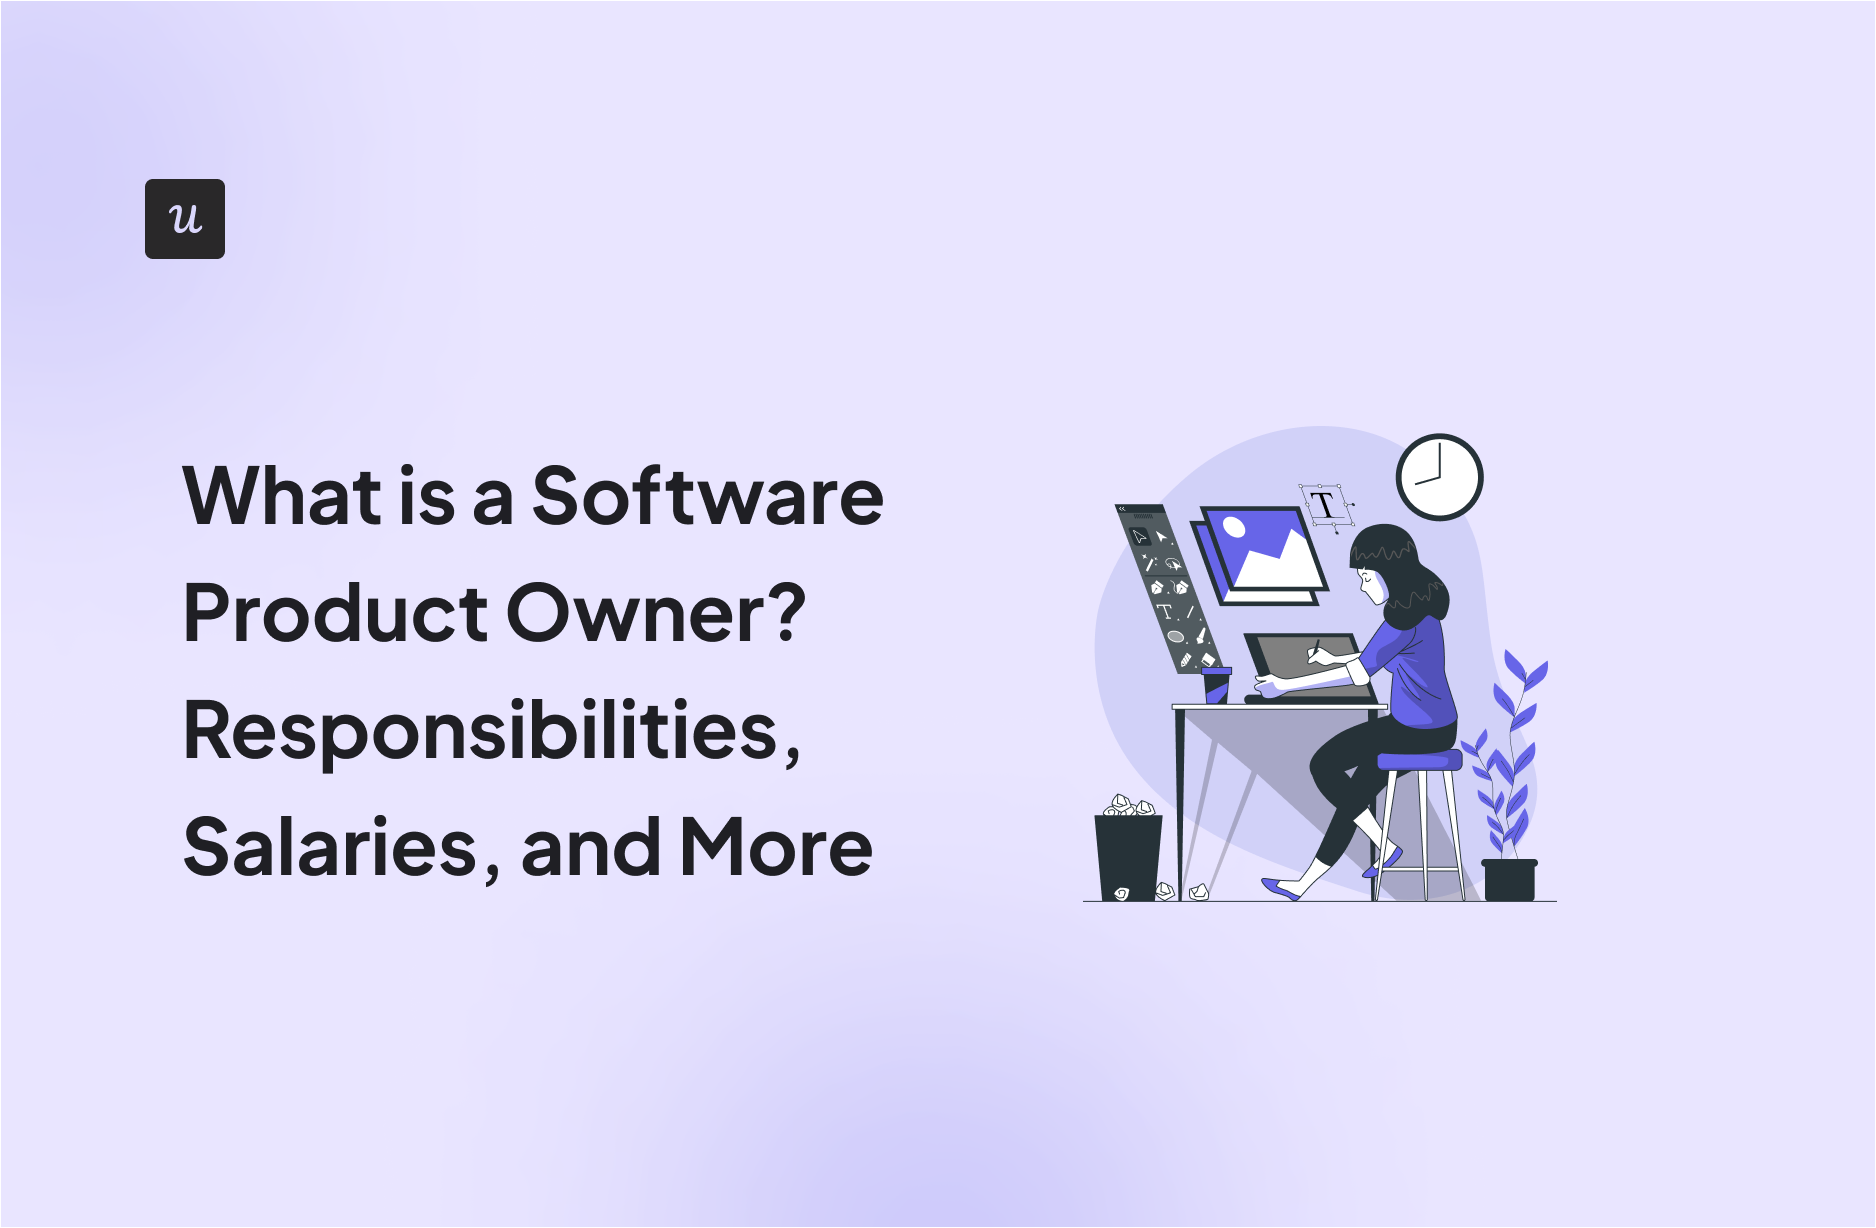 What is a Software Product Owner? Responsibilities, Salaries, and More